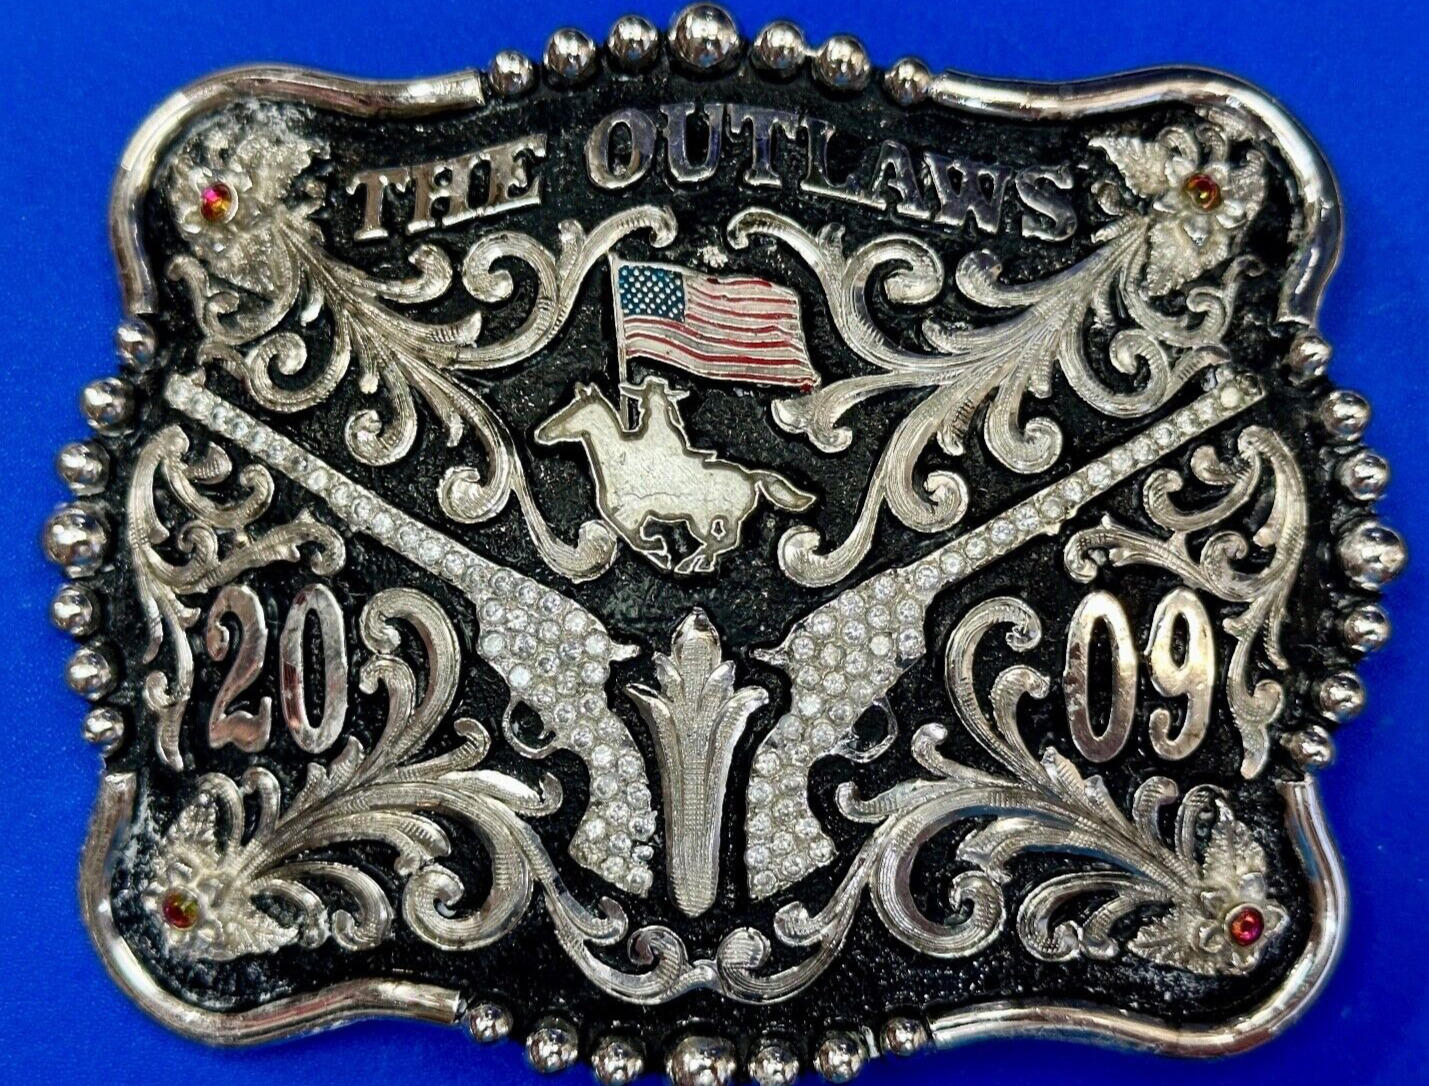 The Outlaws Rodeo Cowboy Trophy 2009 Flag Belt Buckle - Crossroads bucklesTexas